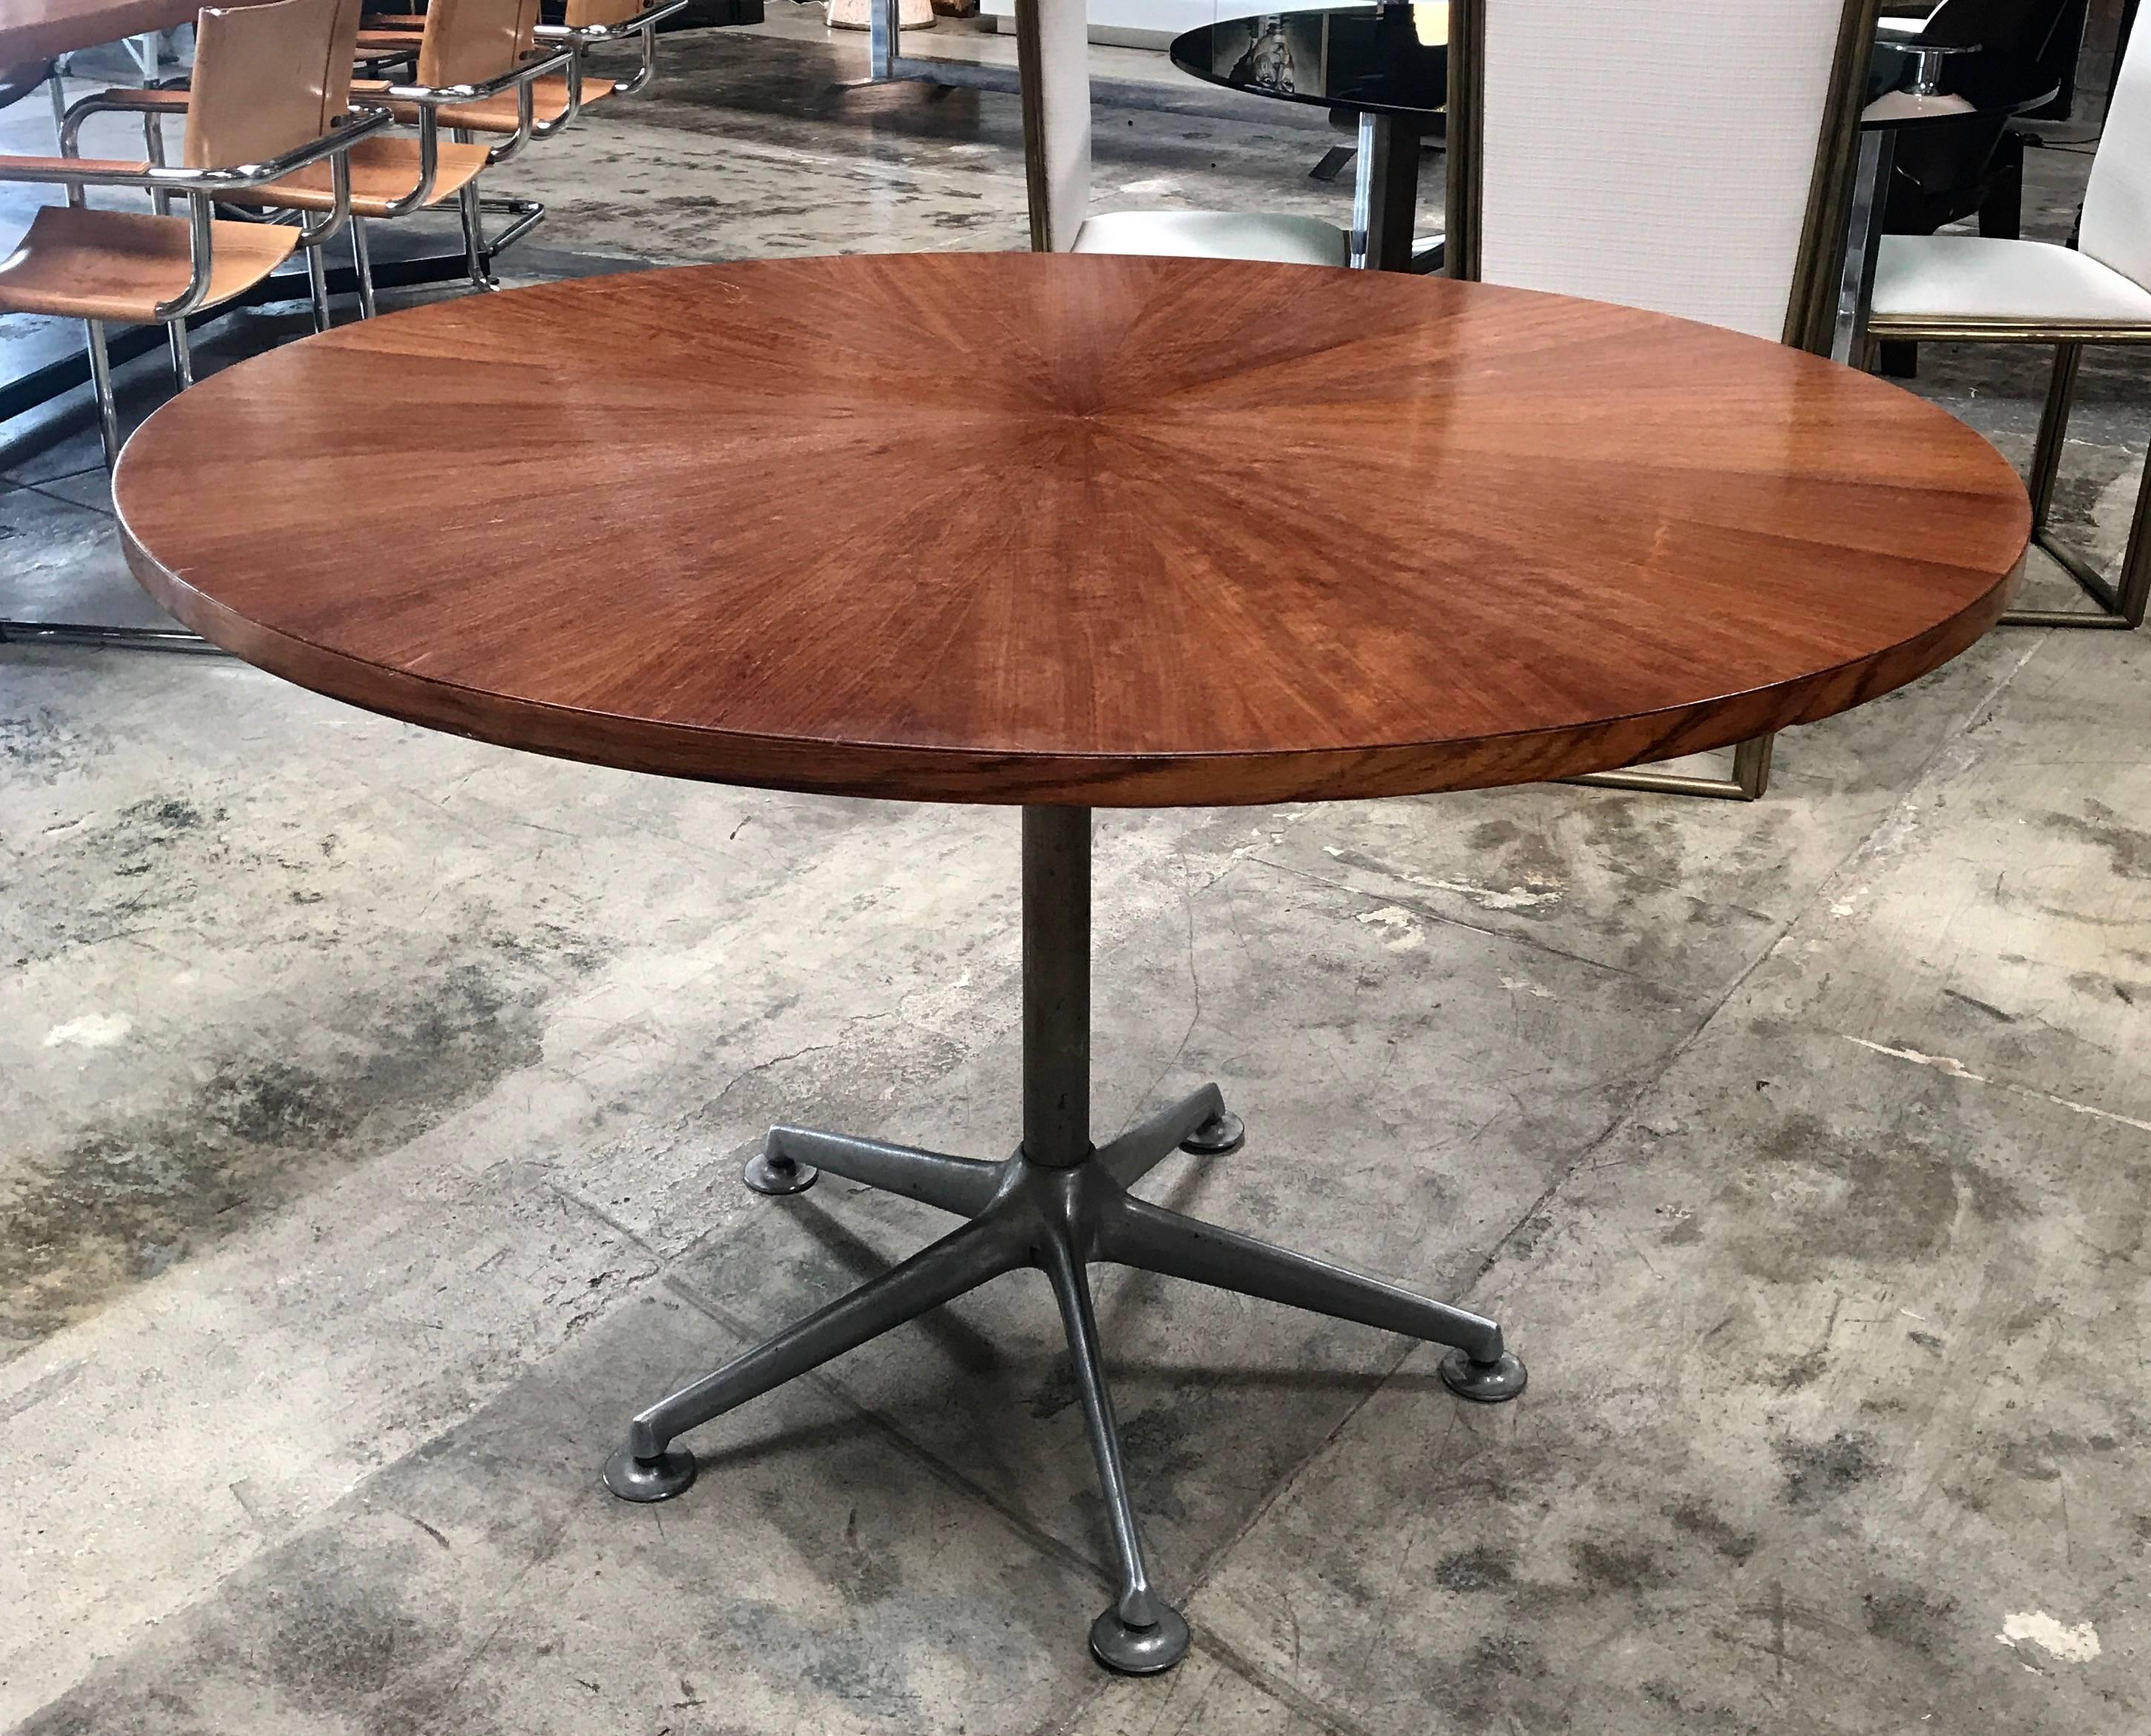 Italian 1960s table by Ico Parisi for MIM.